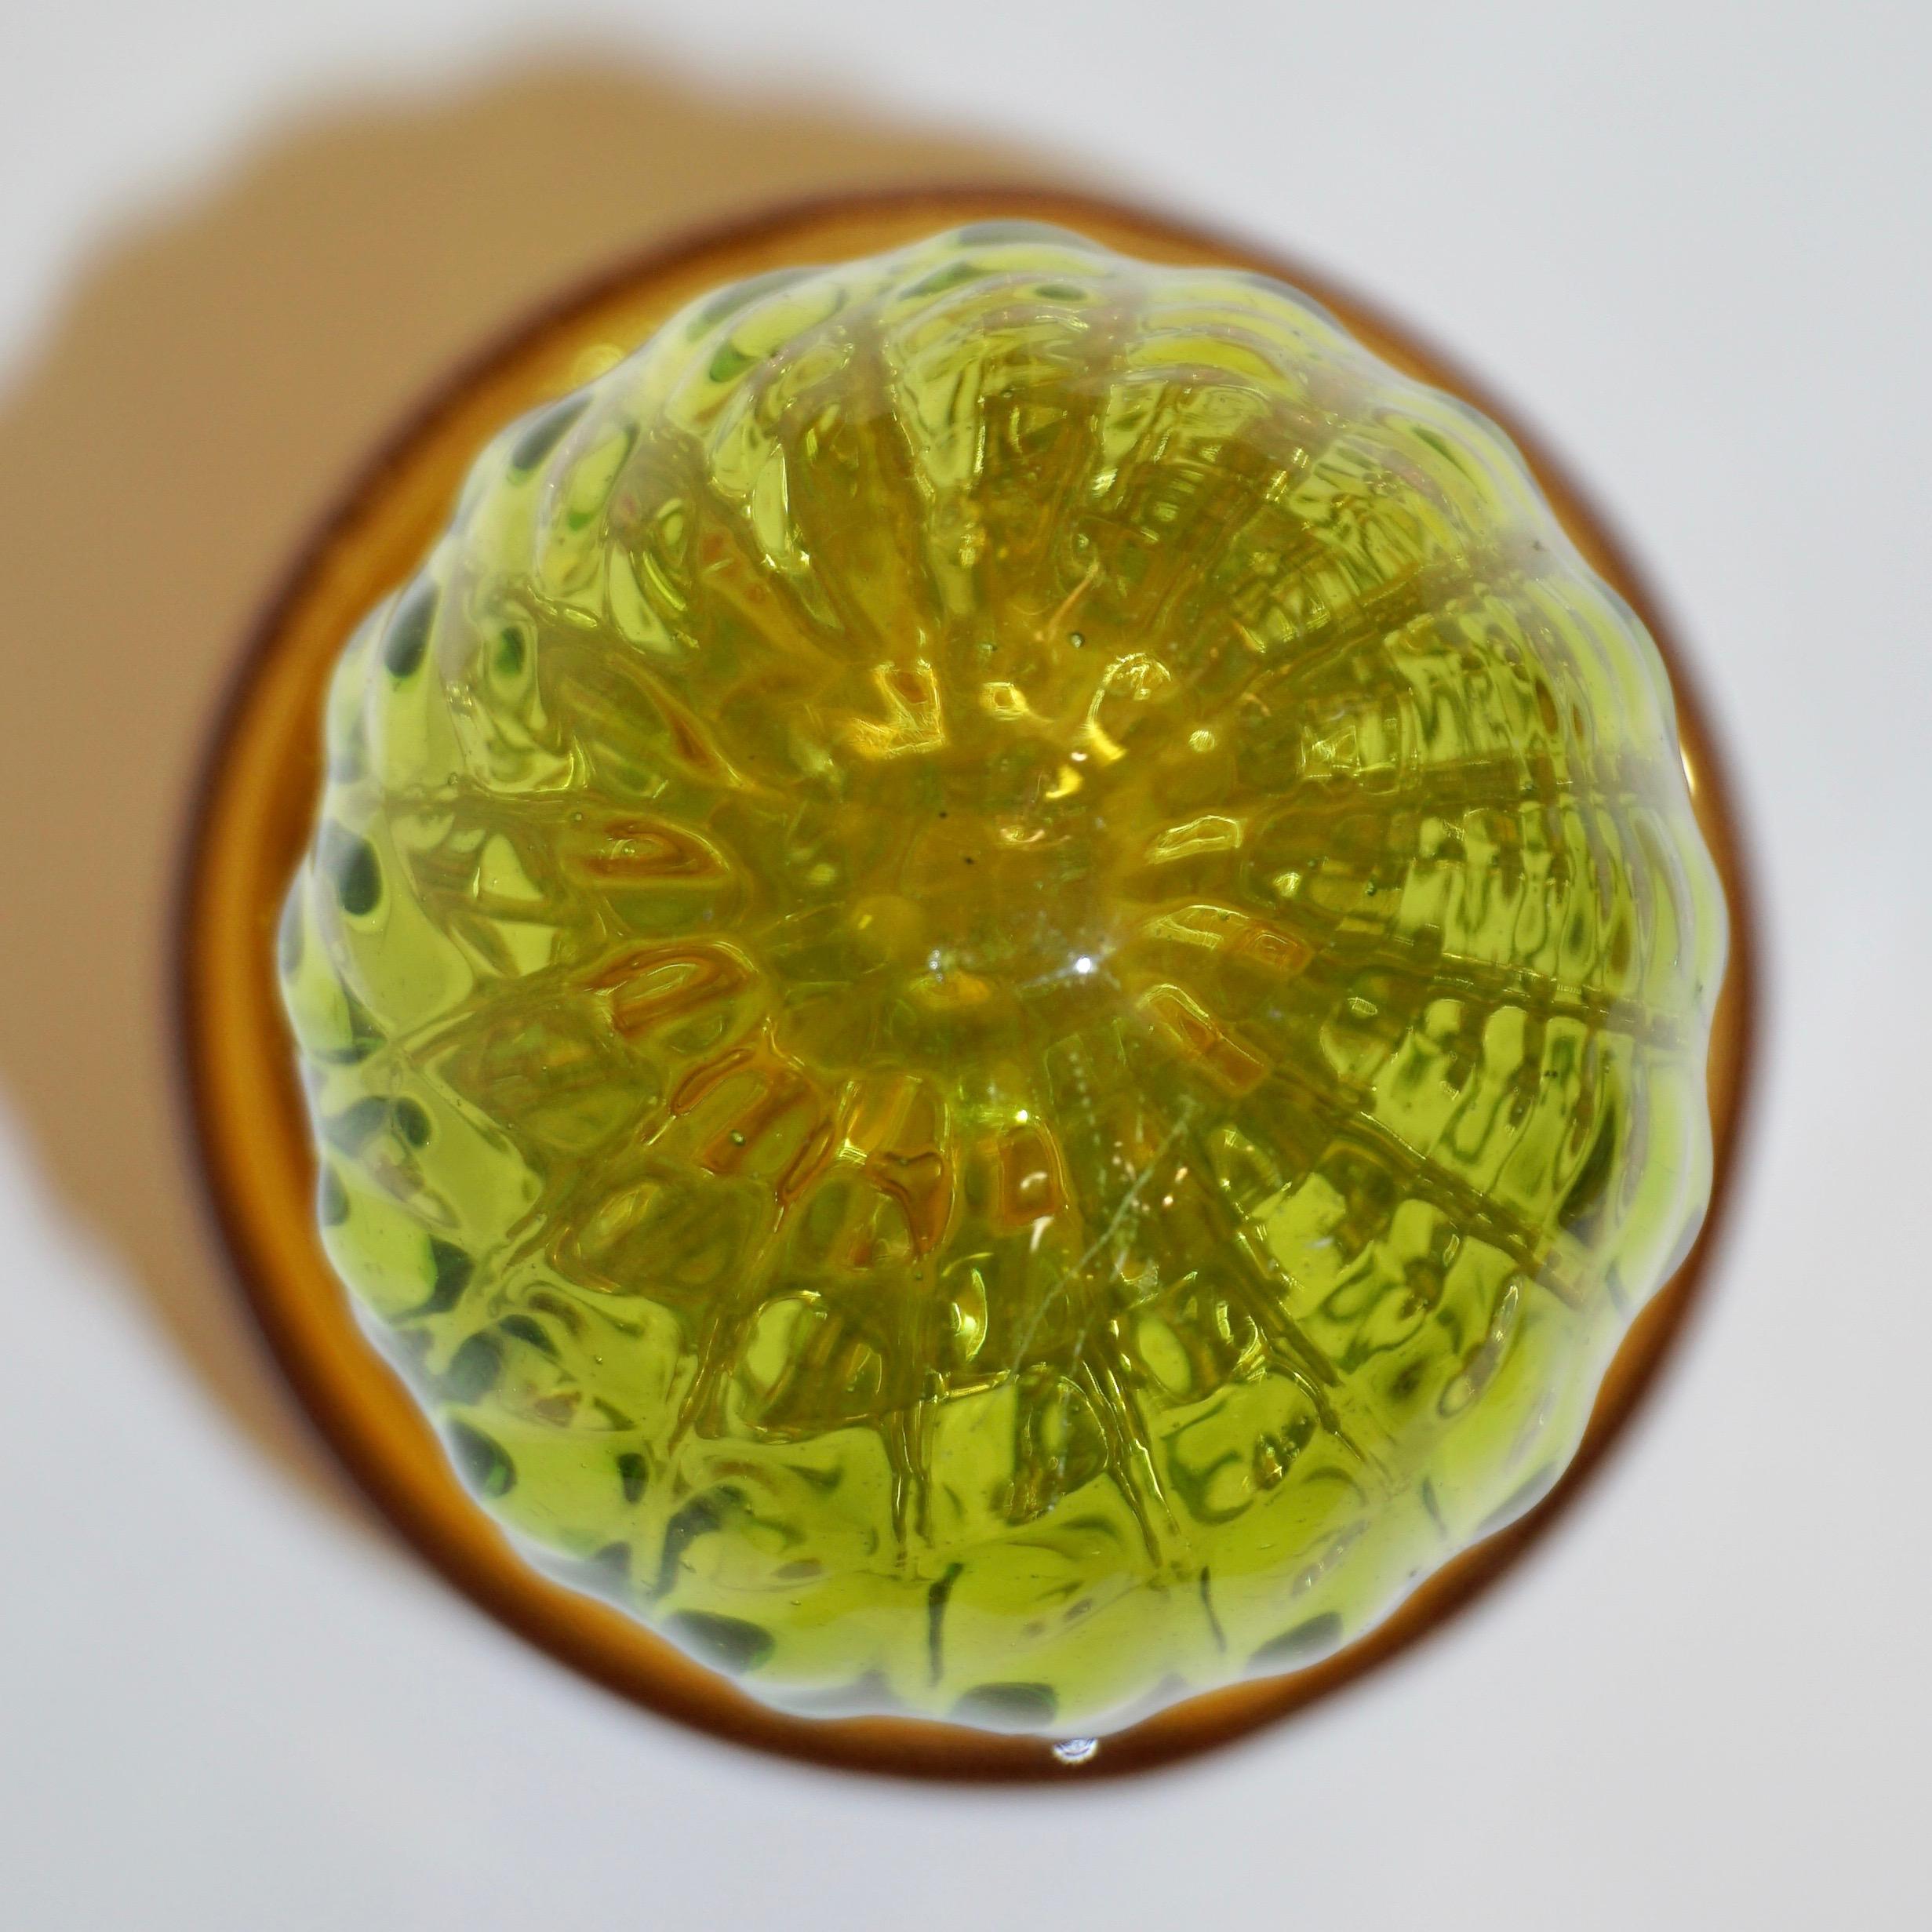 1990 Italian highly collectible blown glass cactus of a limited edition by Formia, entirely handcrafted in Murano with modern Minimalist design, in a lifelike organic modernist shape in apple green chartreuse Murano glass highlighted by a honeycomb